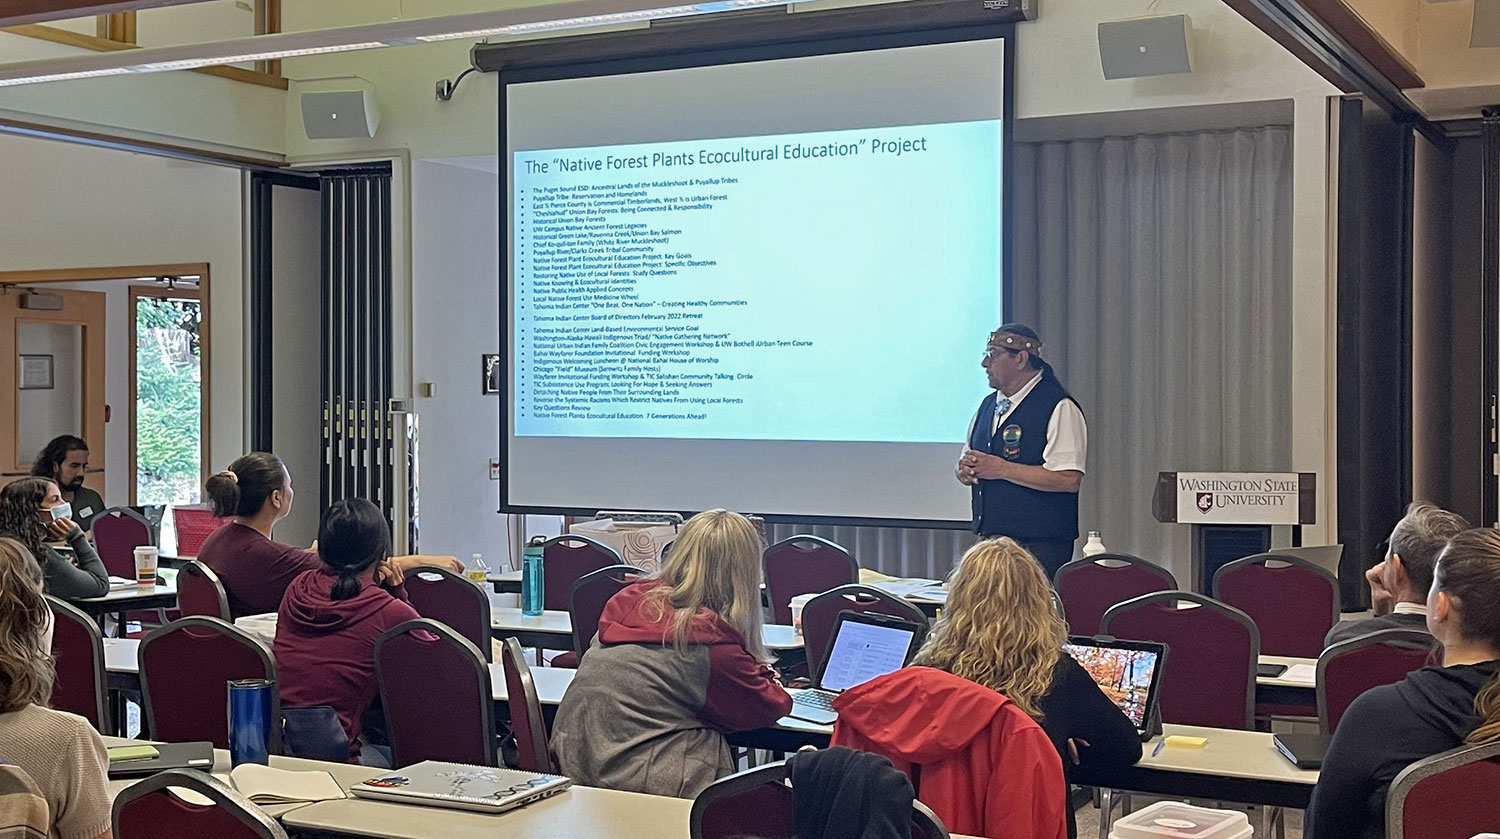 Jeffrey Thomas, Director of Timber, Fish, and Wildlife for the Puyallup Tribe of Indians, shared about current and historical Indigenous connections to local forests